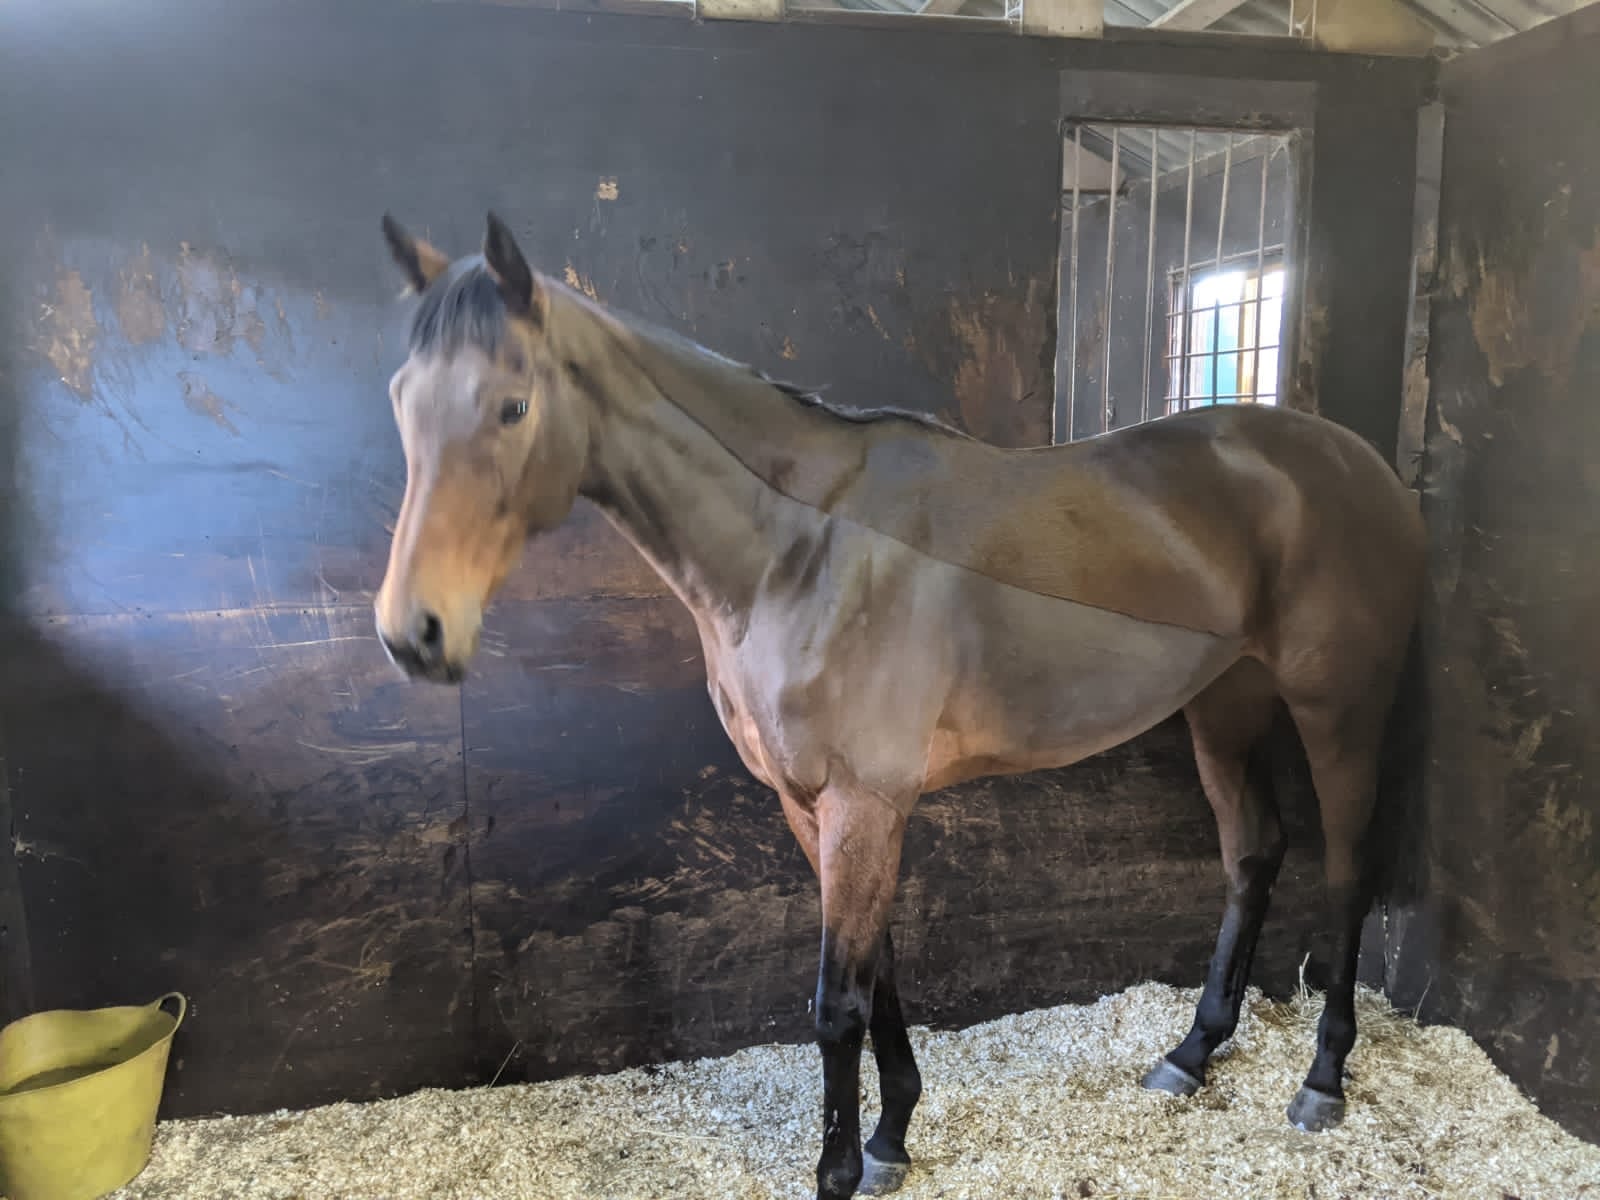 Risaalaat looking as wonderful as ever – on her way now to race at Kempton this evening.